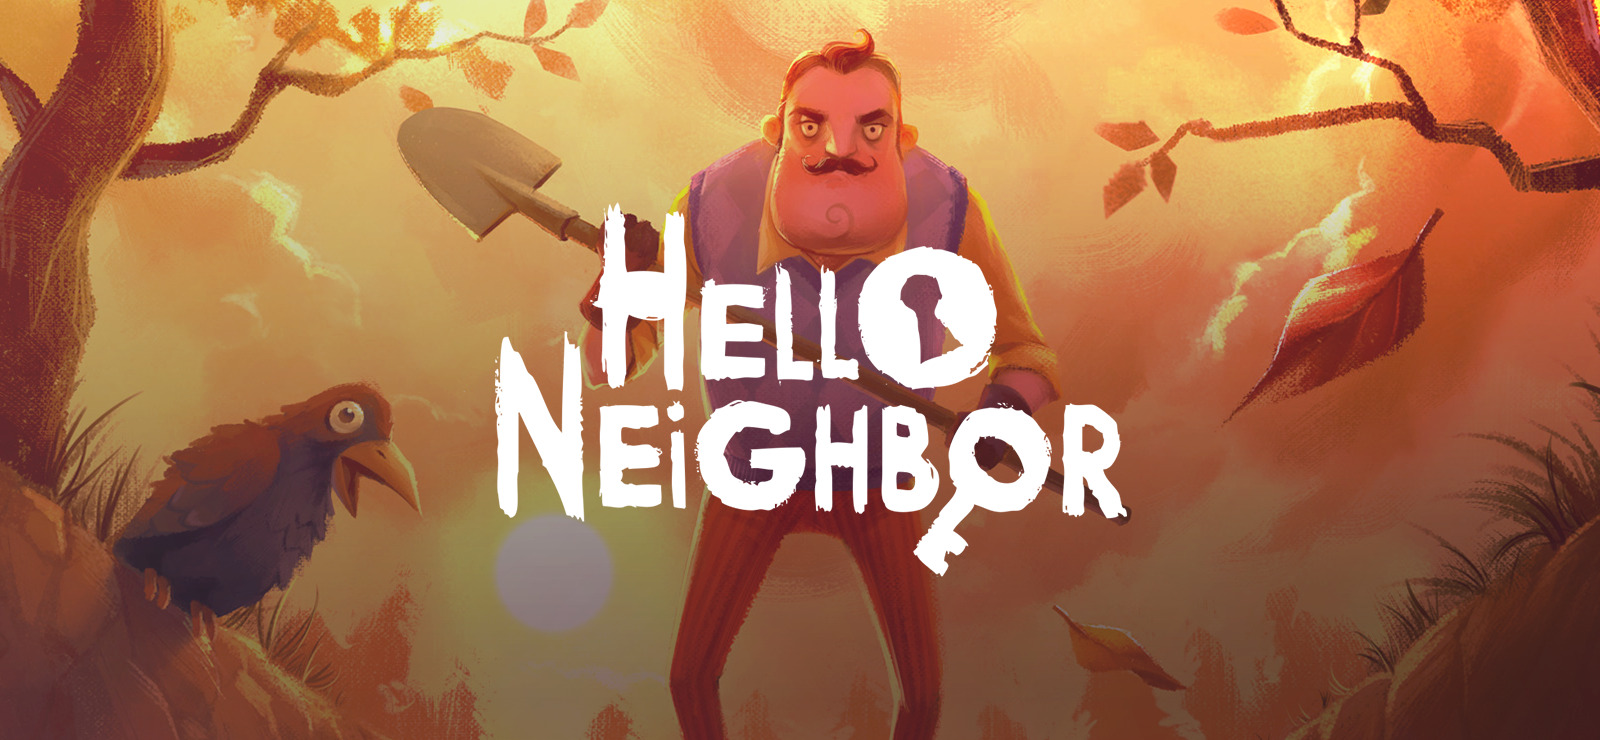 hello neighbor game download free full version